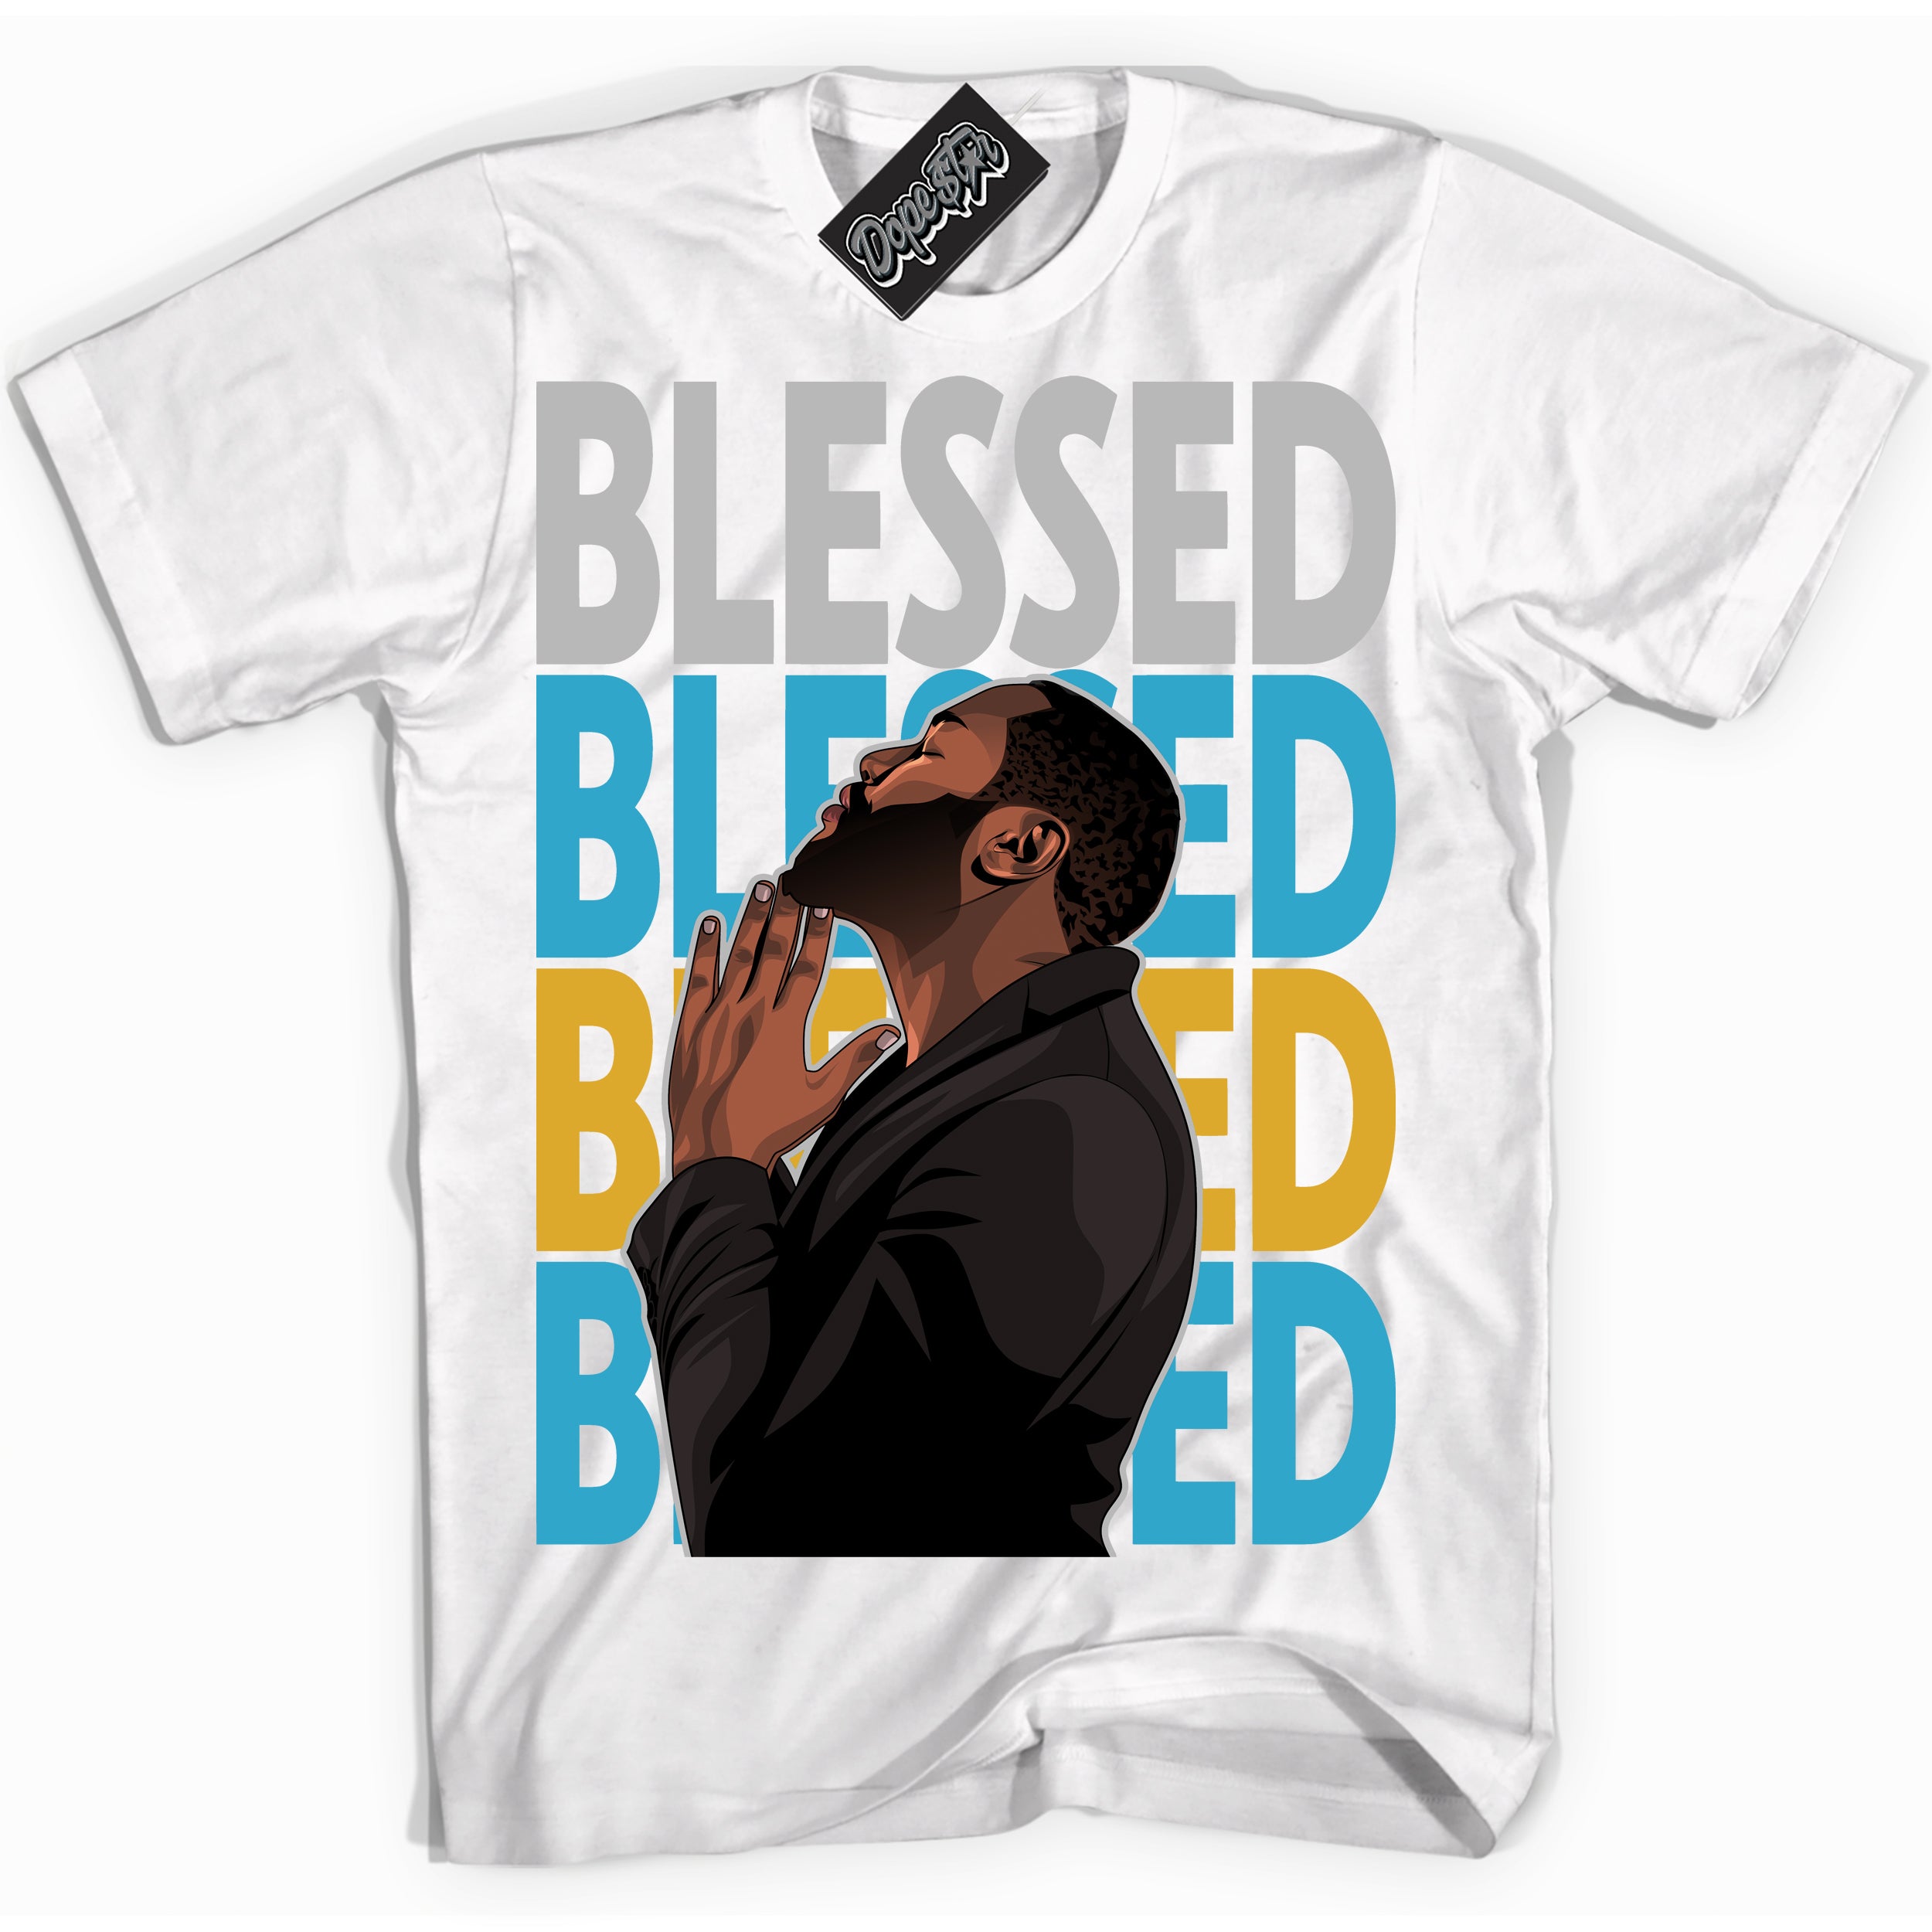 Cool White graphic tee with “ God Blessed ” print, that perfectly matches Air Jordan 5 Aqua sneakers